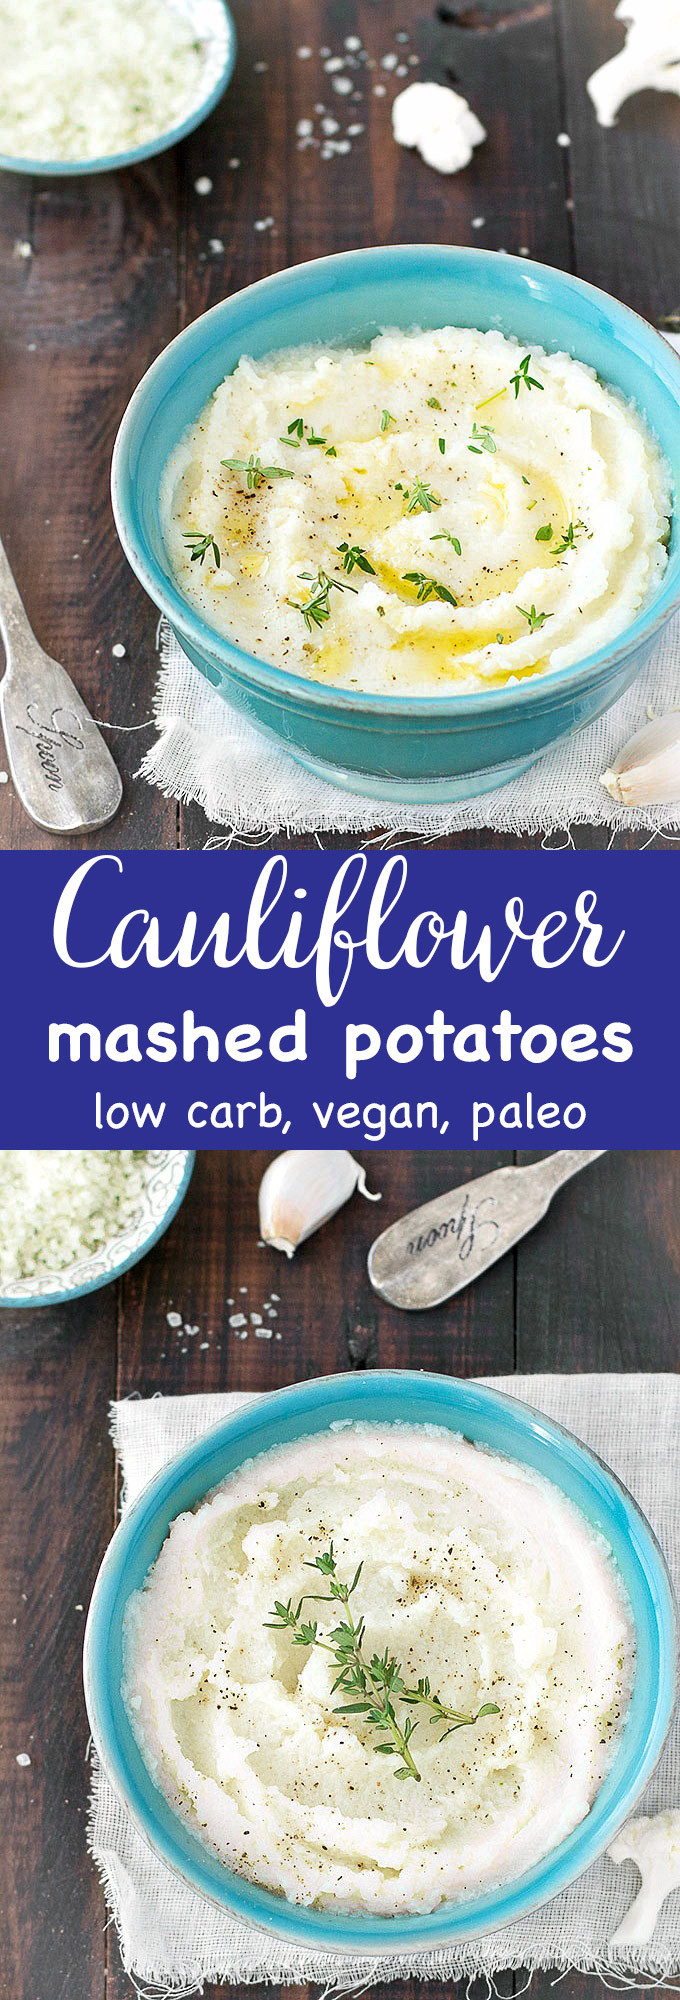 Low Calorie Mashed Potatoes
 Healthy Cauliflower Mashed Potatoes As Easy As Apple Pie